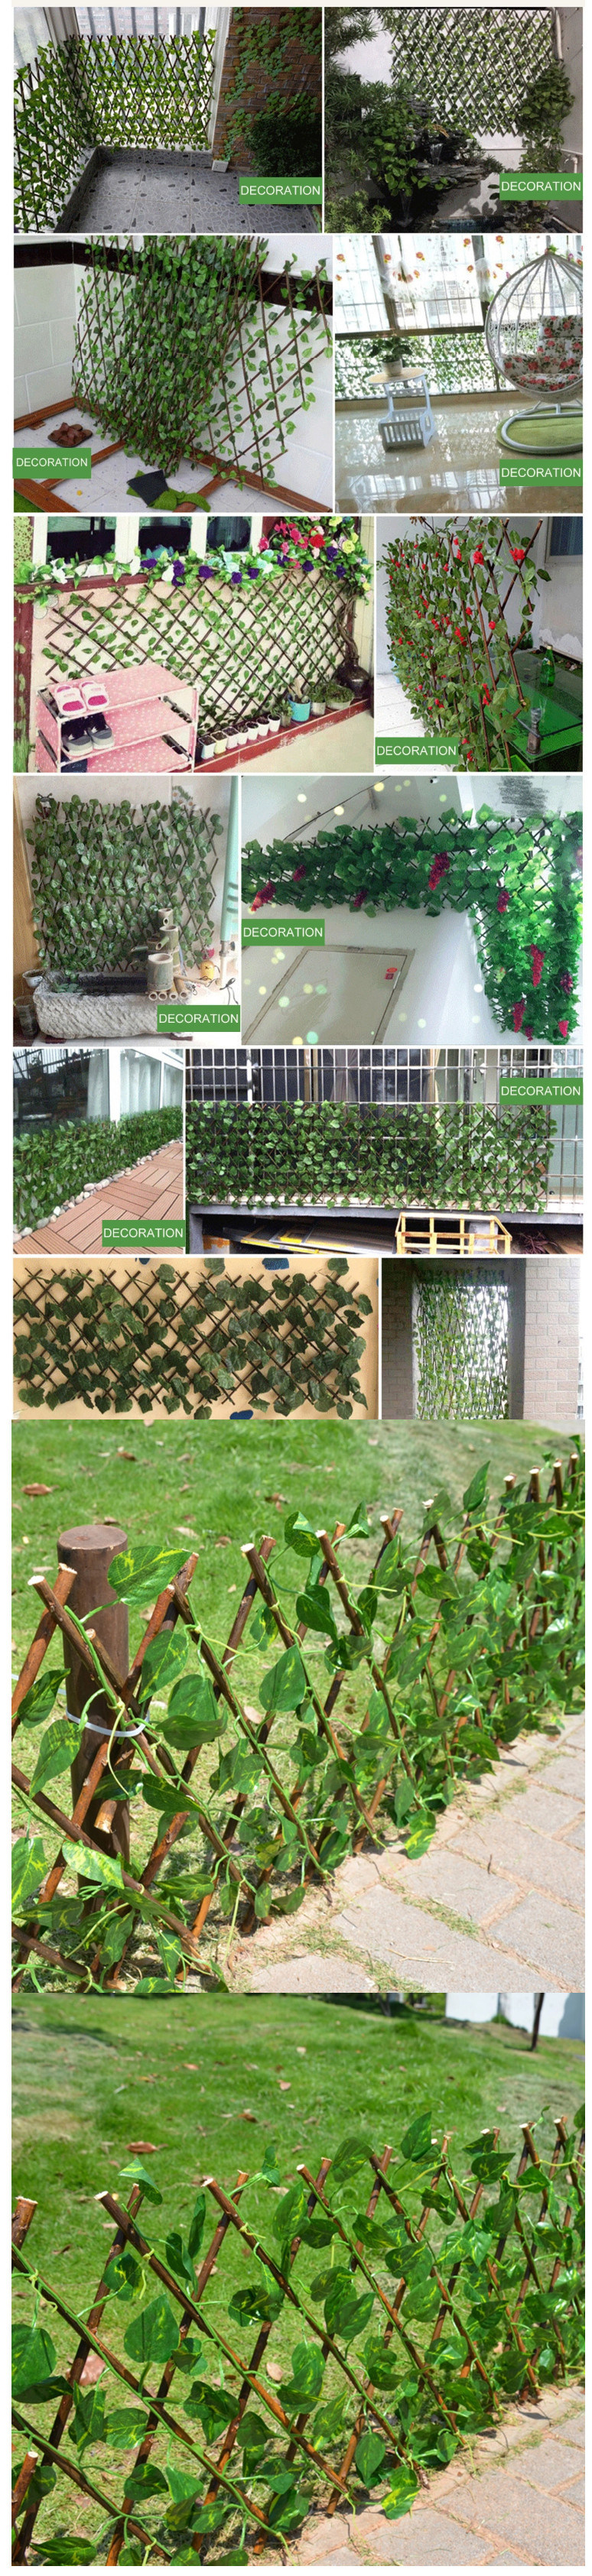 Faux Laurel Hedge Greenery Leaves Fence Privacy Screen Artificial Leaf Fence for Indoor Outdoor Wall